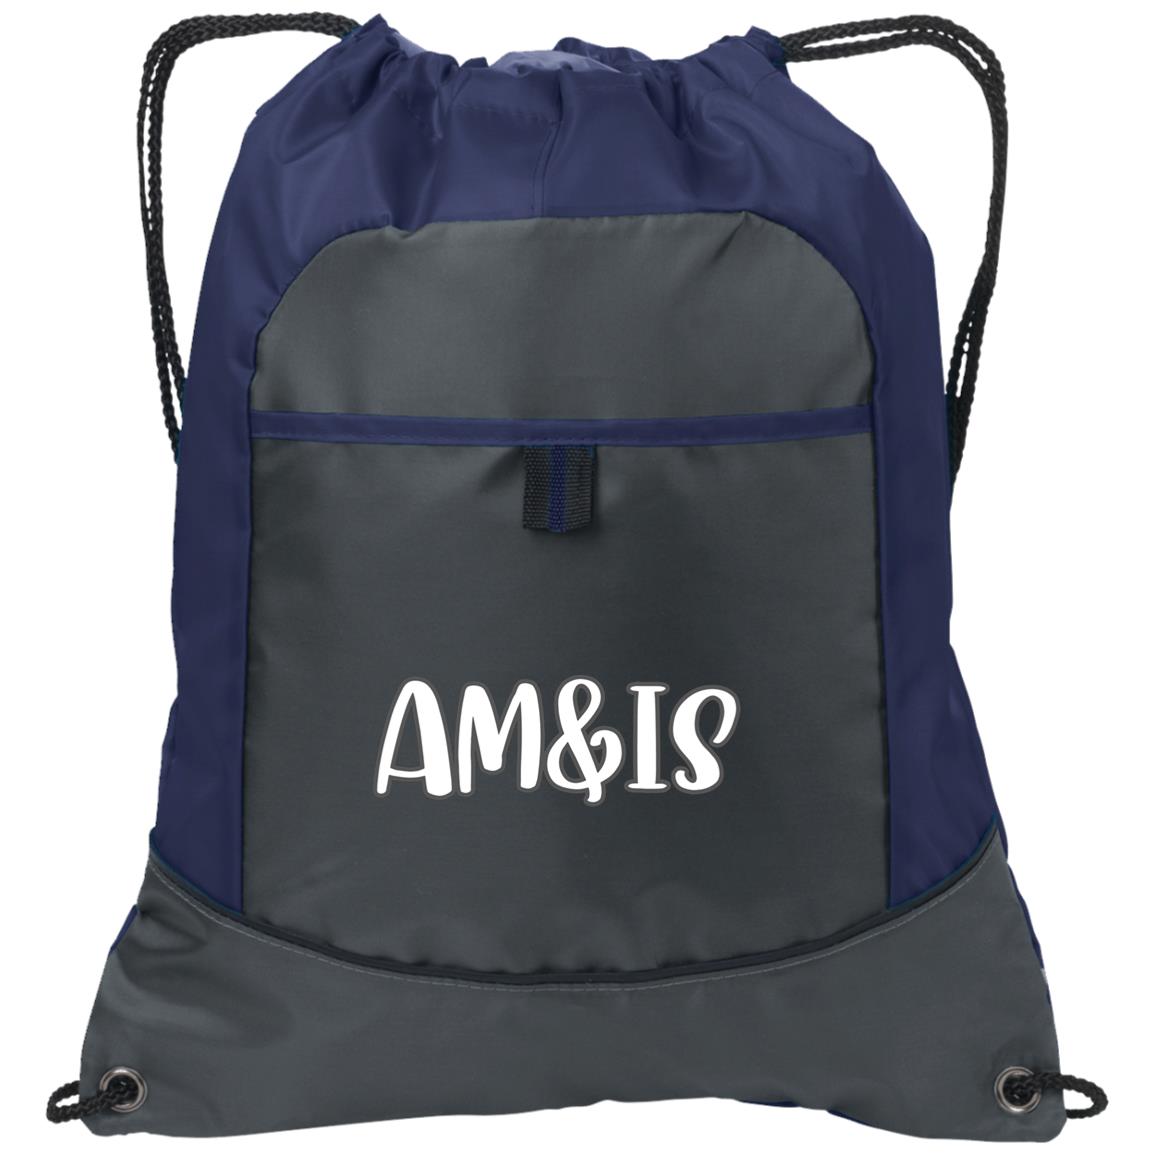 DEEP SMOKE/TRUE NAVY ONE SIZE - AM&IS Activewear Pocket Cinch Pack - Backpacks at TFC&H Co.